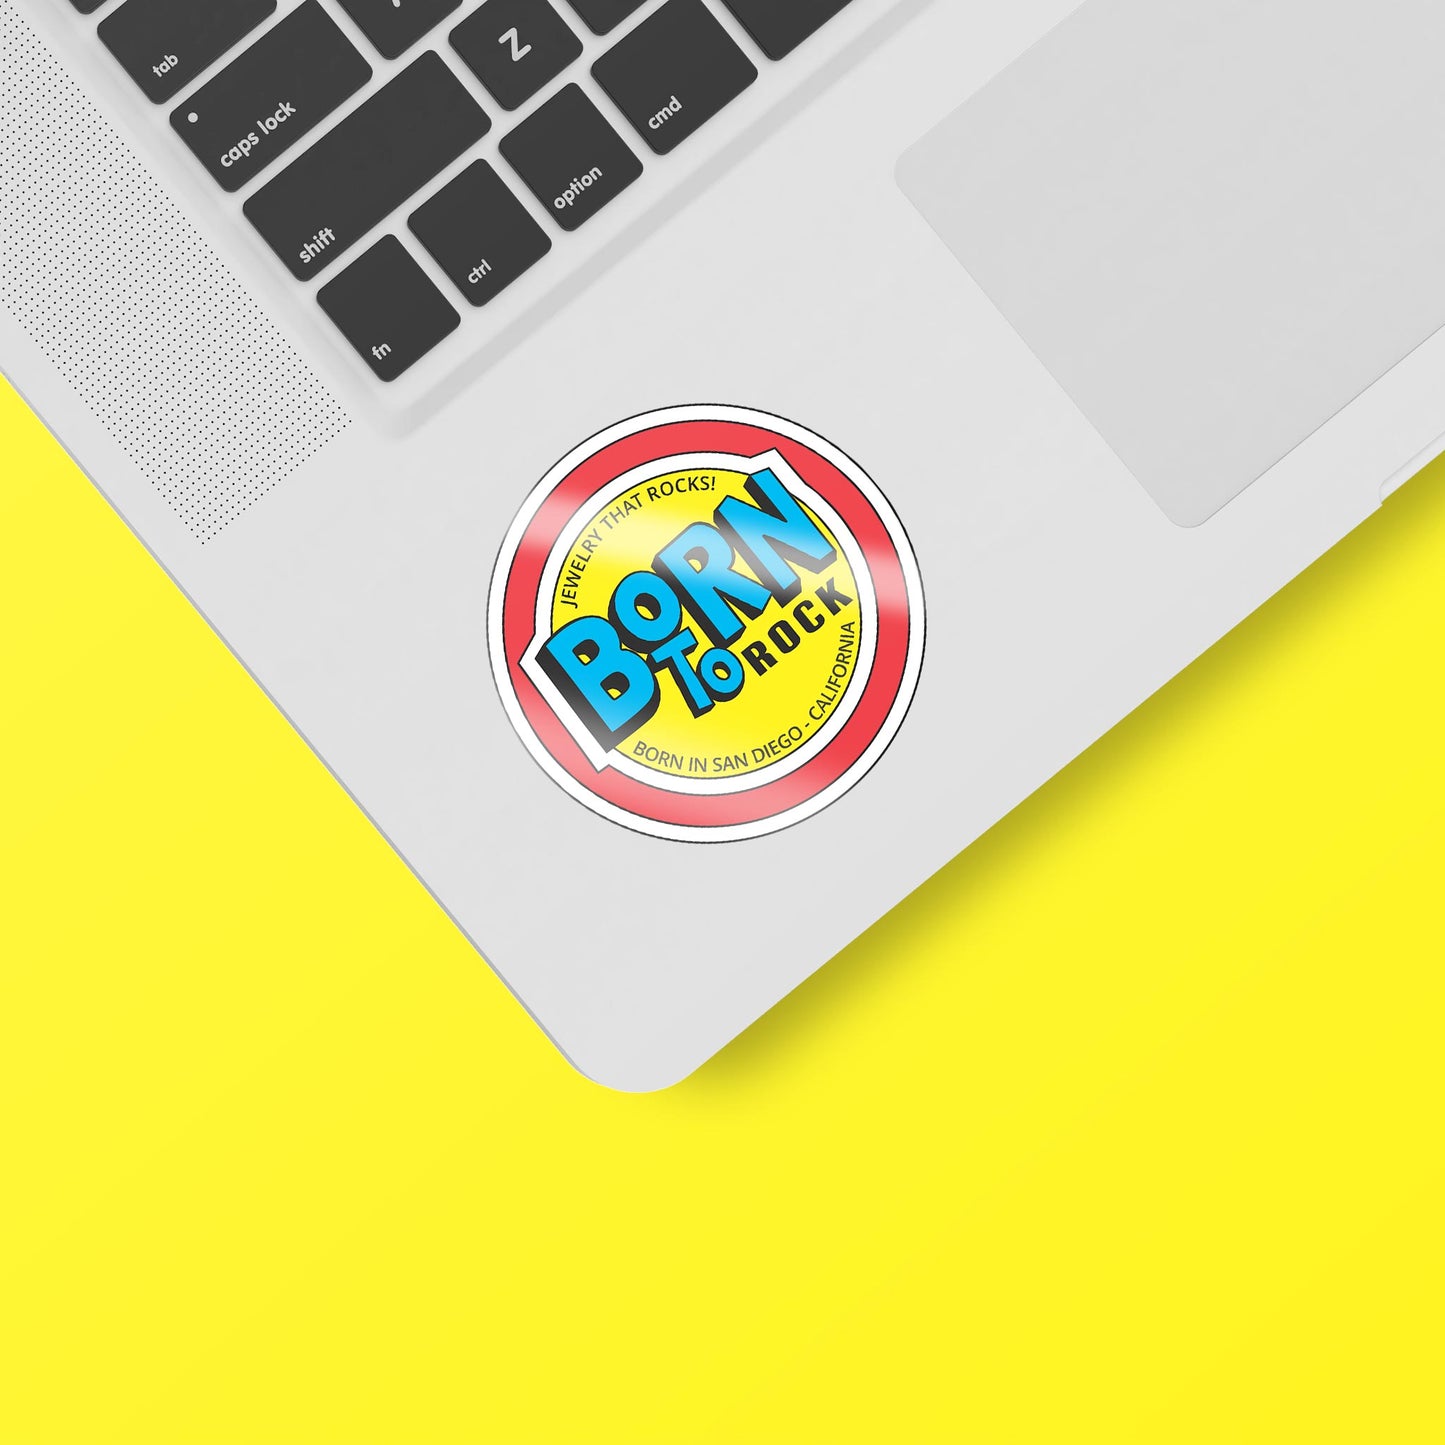 FREE Born to Rock sticker available in every online order! Our colorful sticker is great for decorating water bottles, car windows, journals, notebooks, laptops, cups, bikes, skateboards, anything you want to add that extra color and fun!